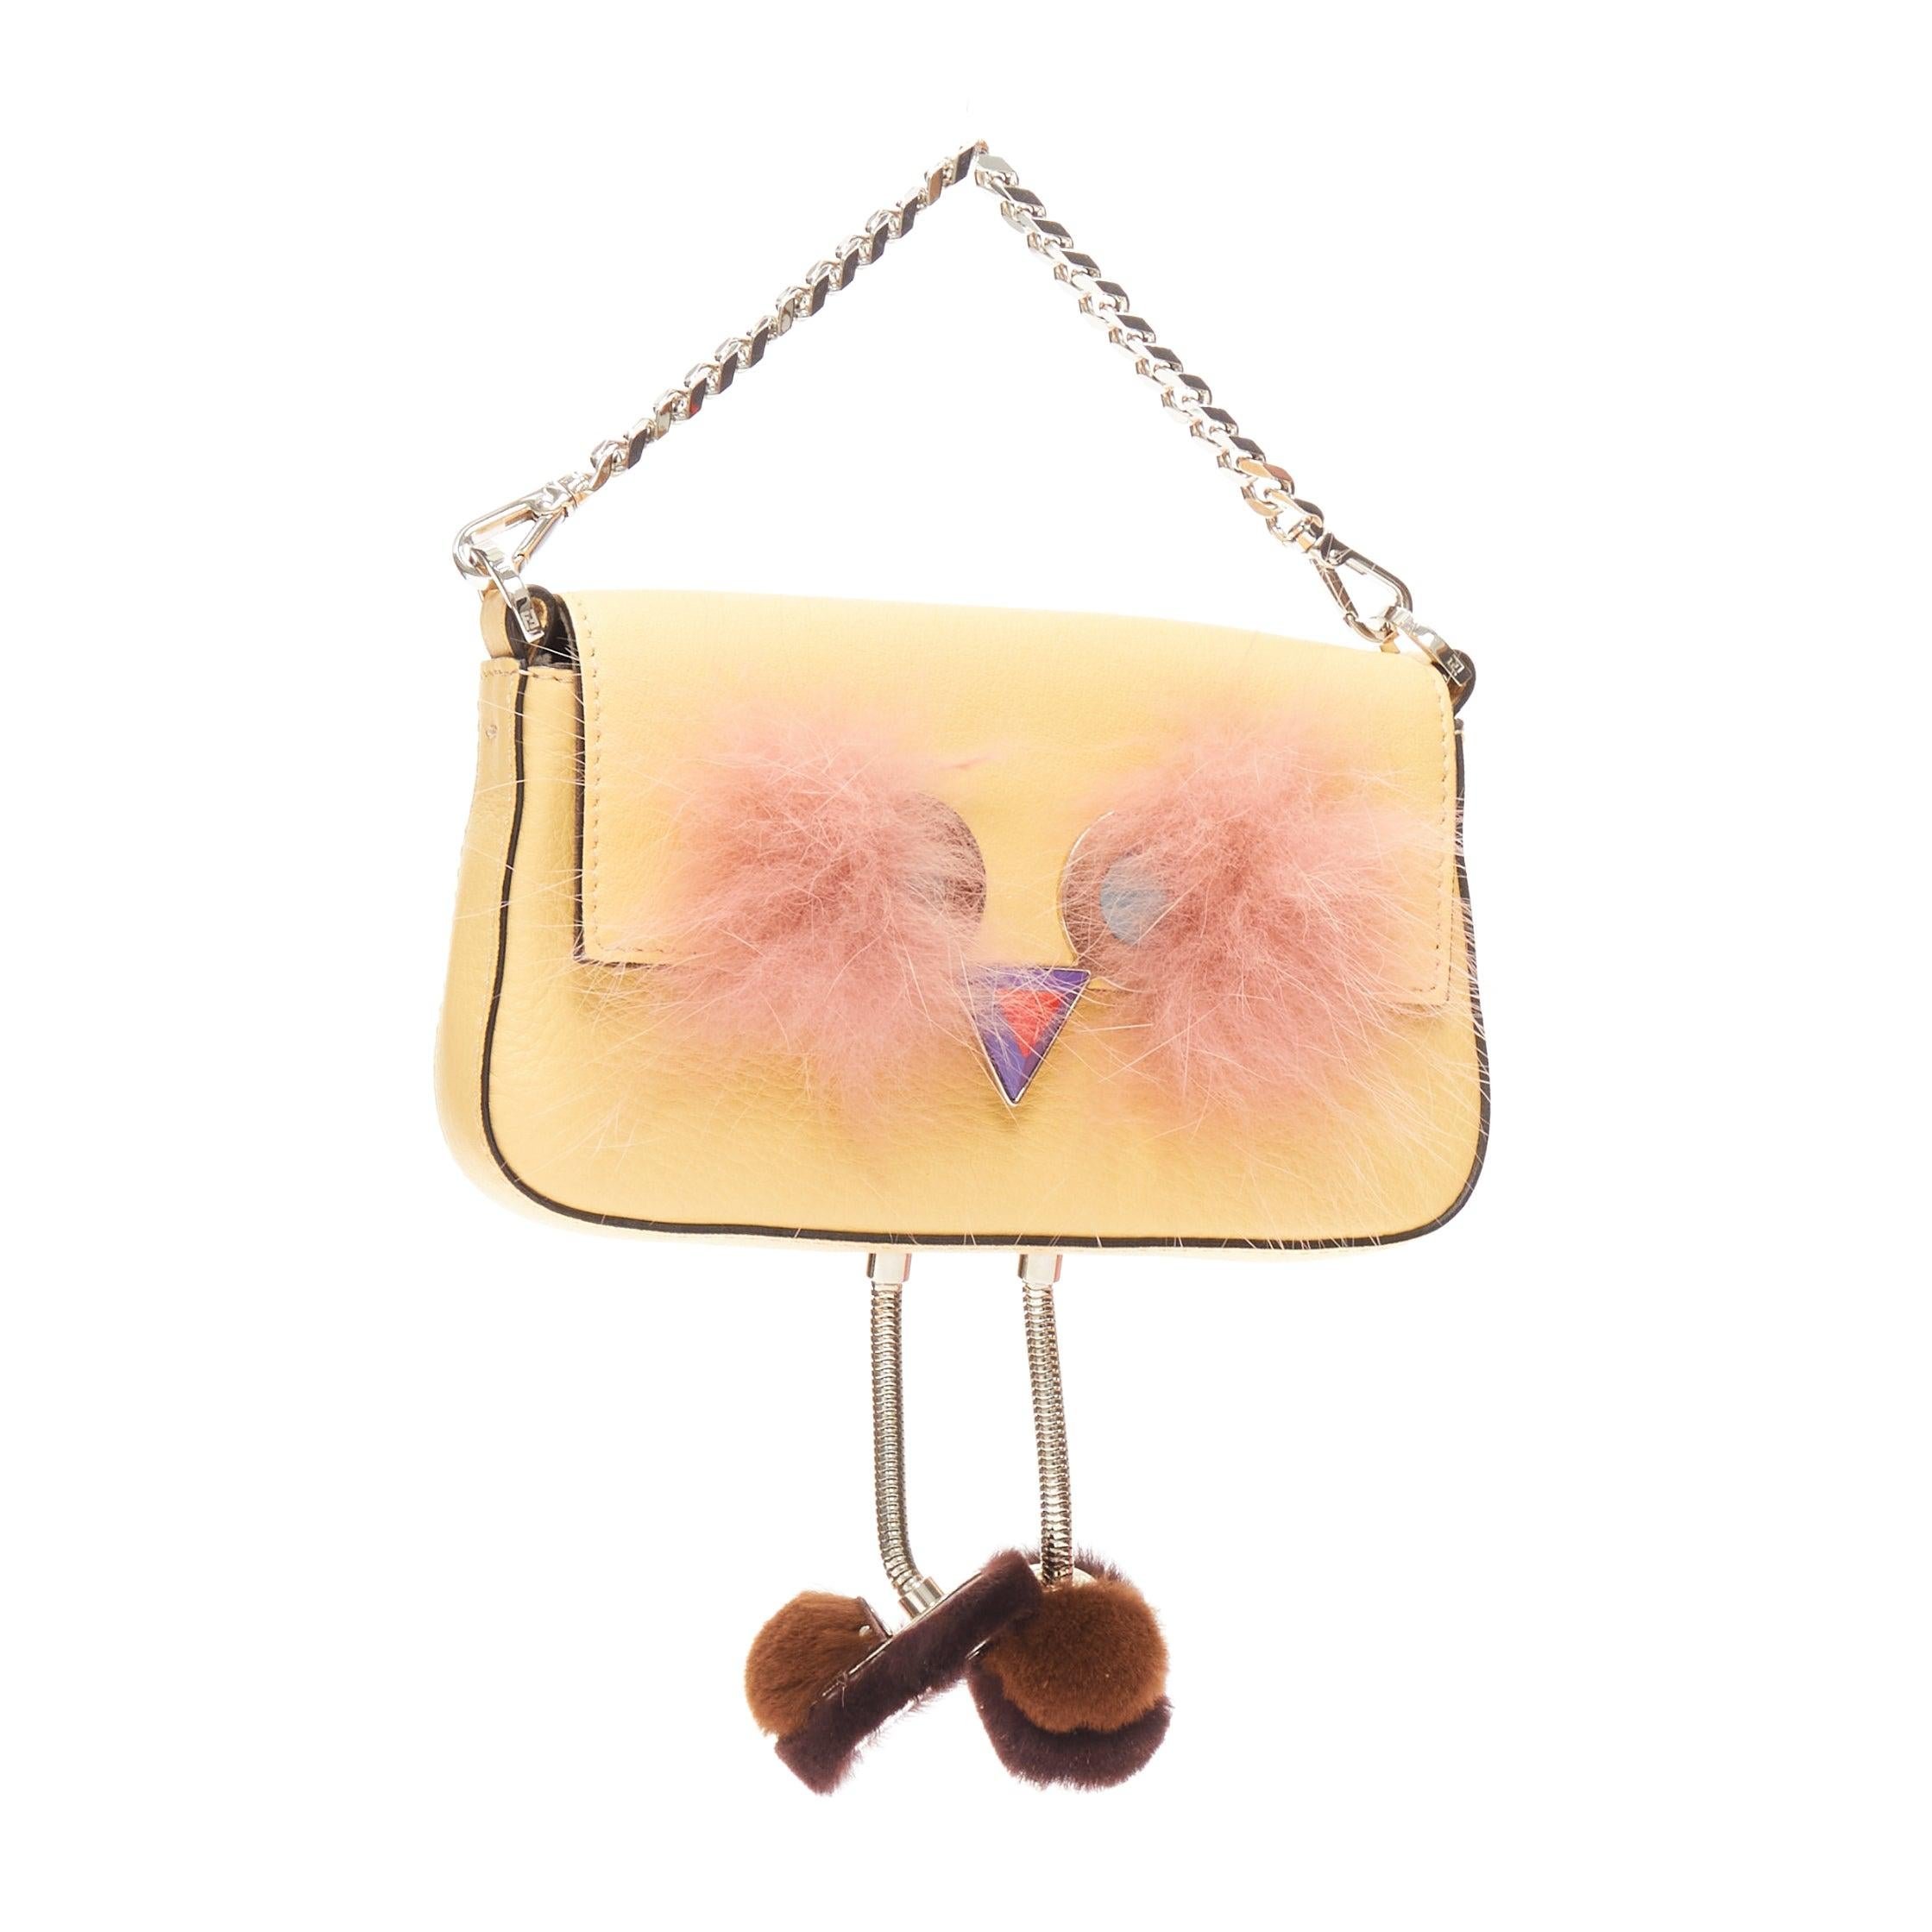 FENDI Hypnoteyes Micro Baguette pink rabbit fur yellow leather duckling bag
Reference: JACG/A00099
Brand: Fendi
Model: Baguette
Collection: Hypnoteyes
Material: Leather, Fur, Acrylic
Color: Yellow, Pink
Pattern: Solid
Closure: Snap Buttons
Lining: